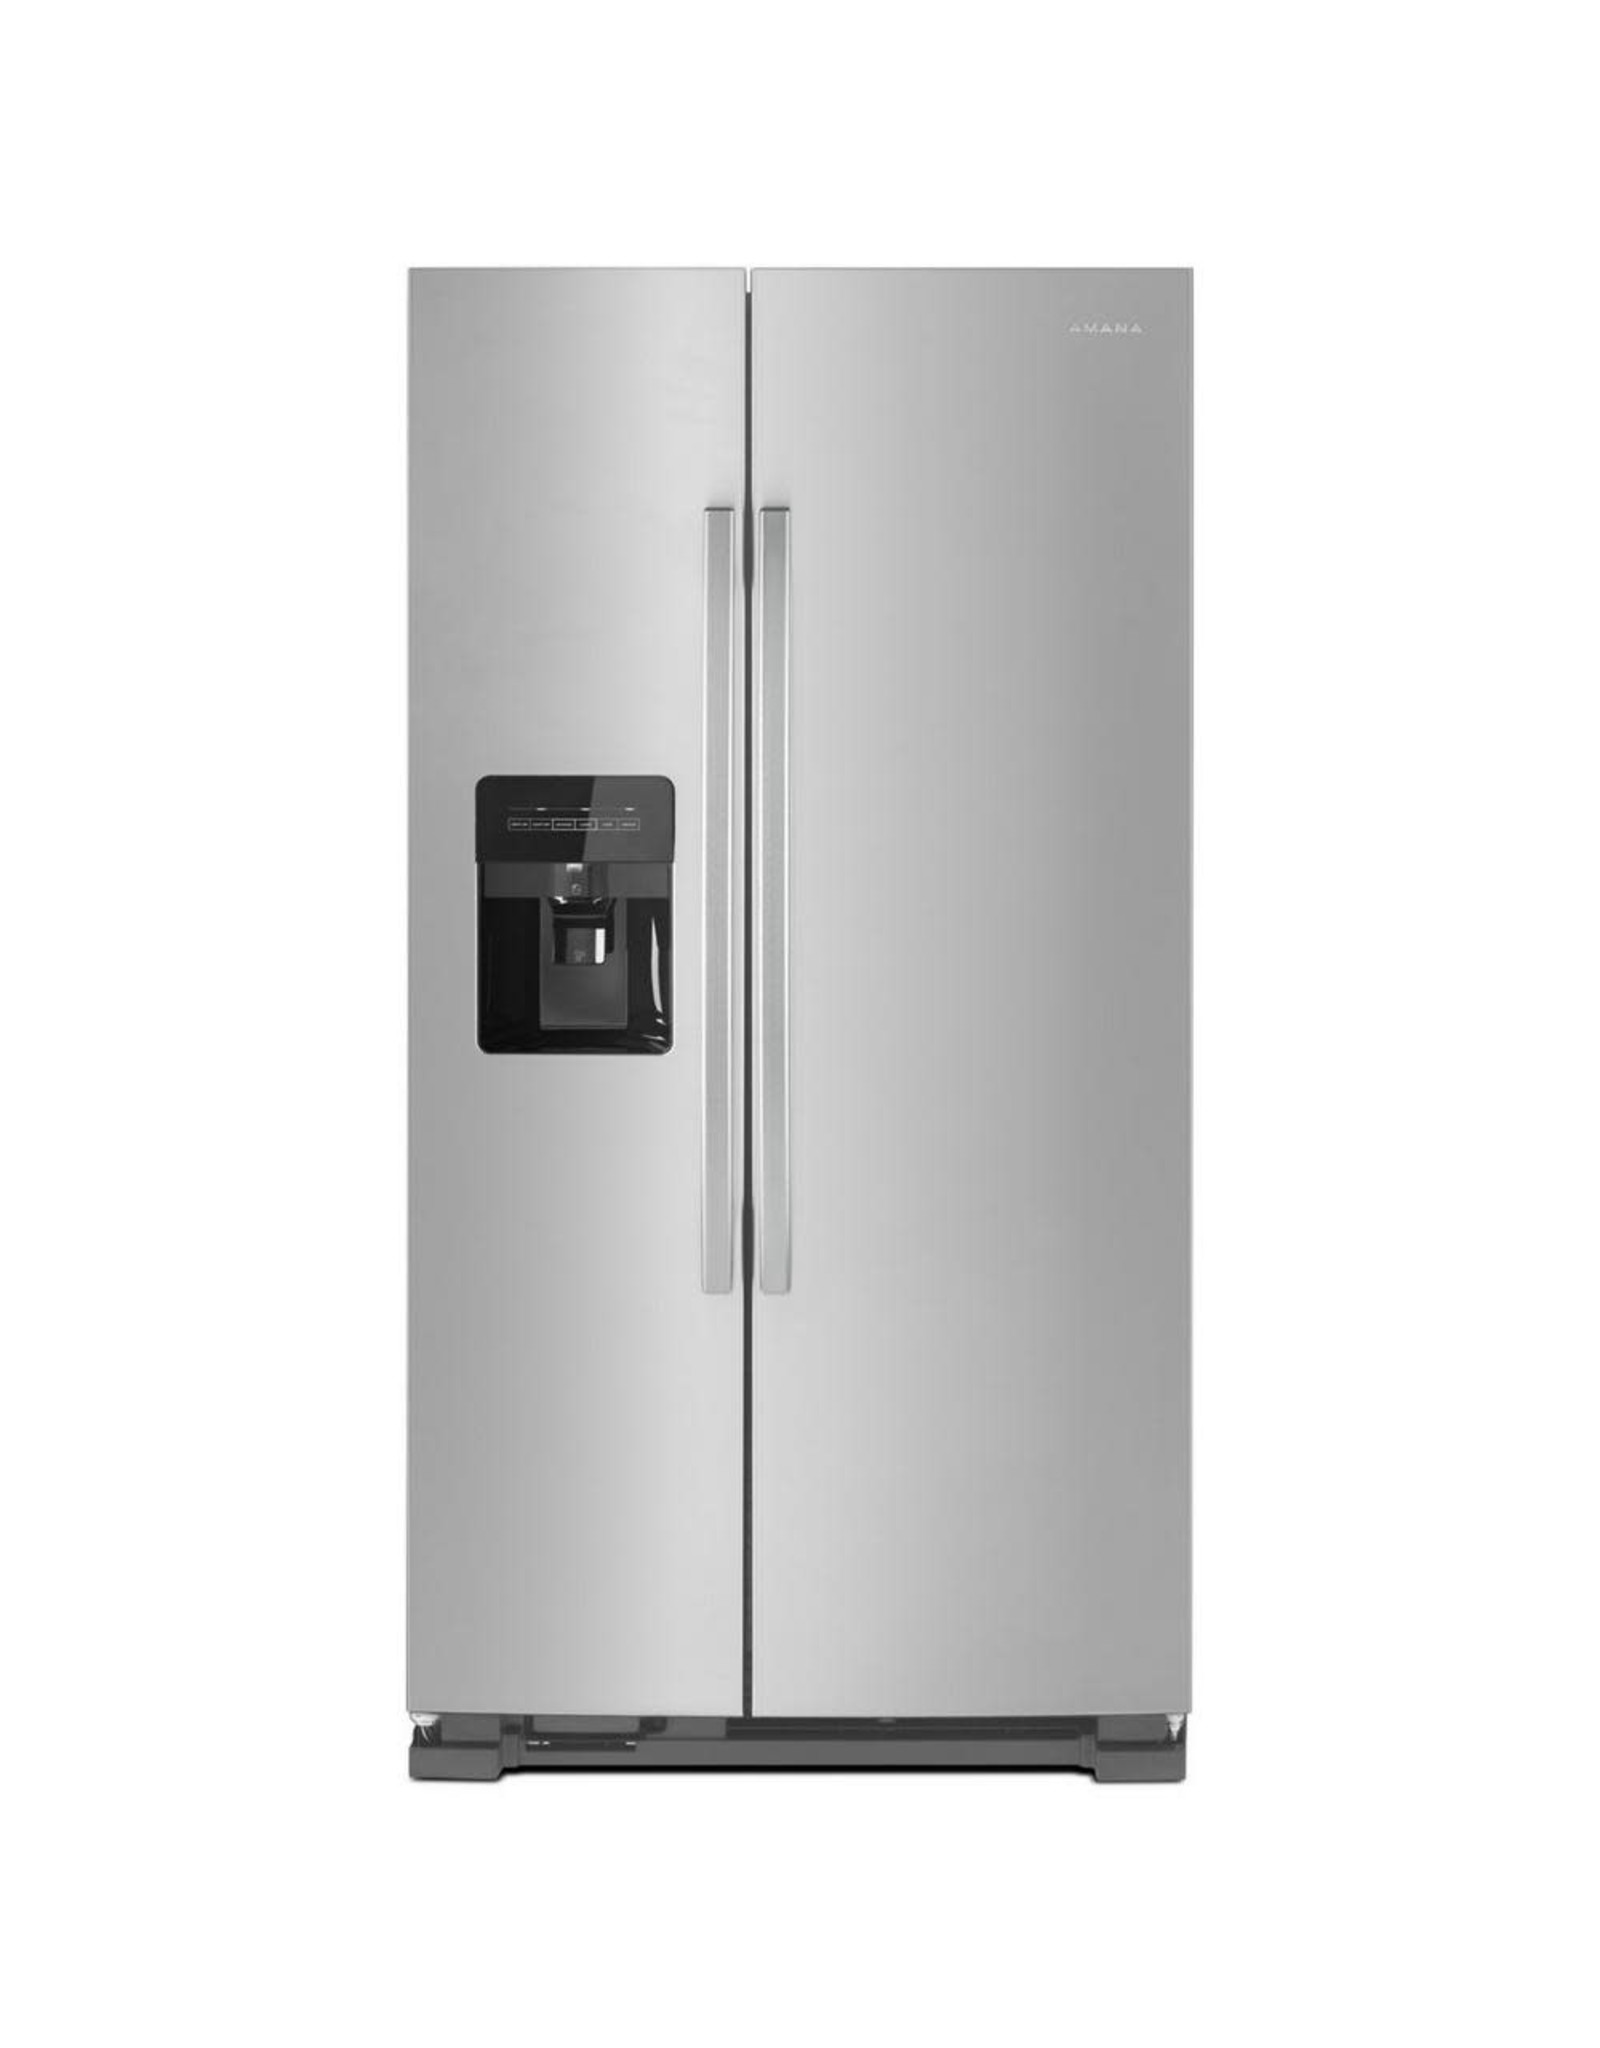 AMANA Dent ASI2575GRS AMA No Frost Side - Free Standing Refr Frez - 25 CU FT, 36 INCH WIDTH, HIDDEN HINGES,